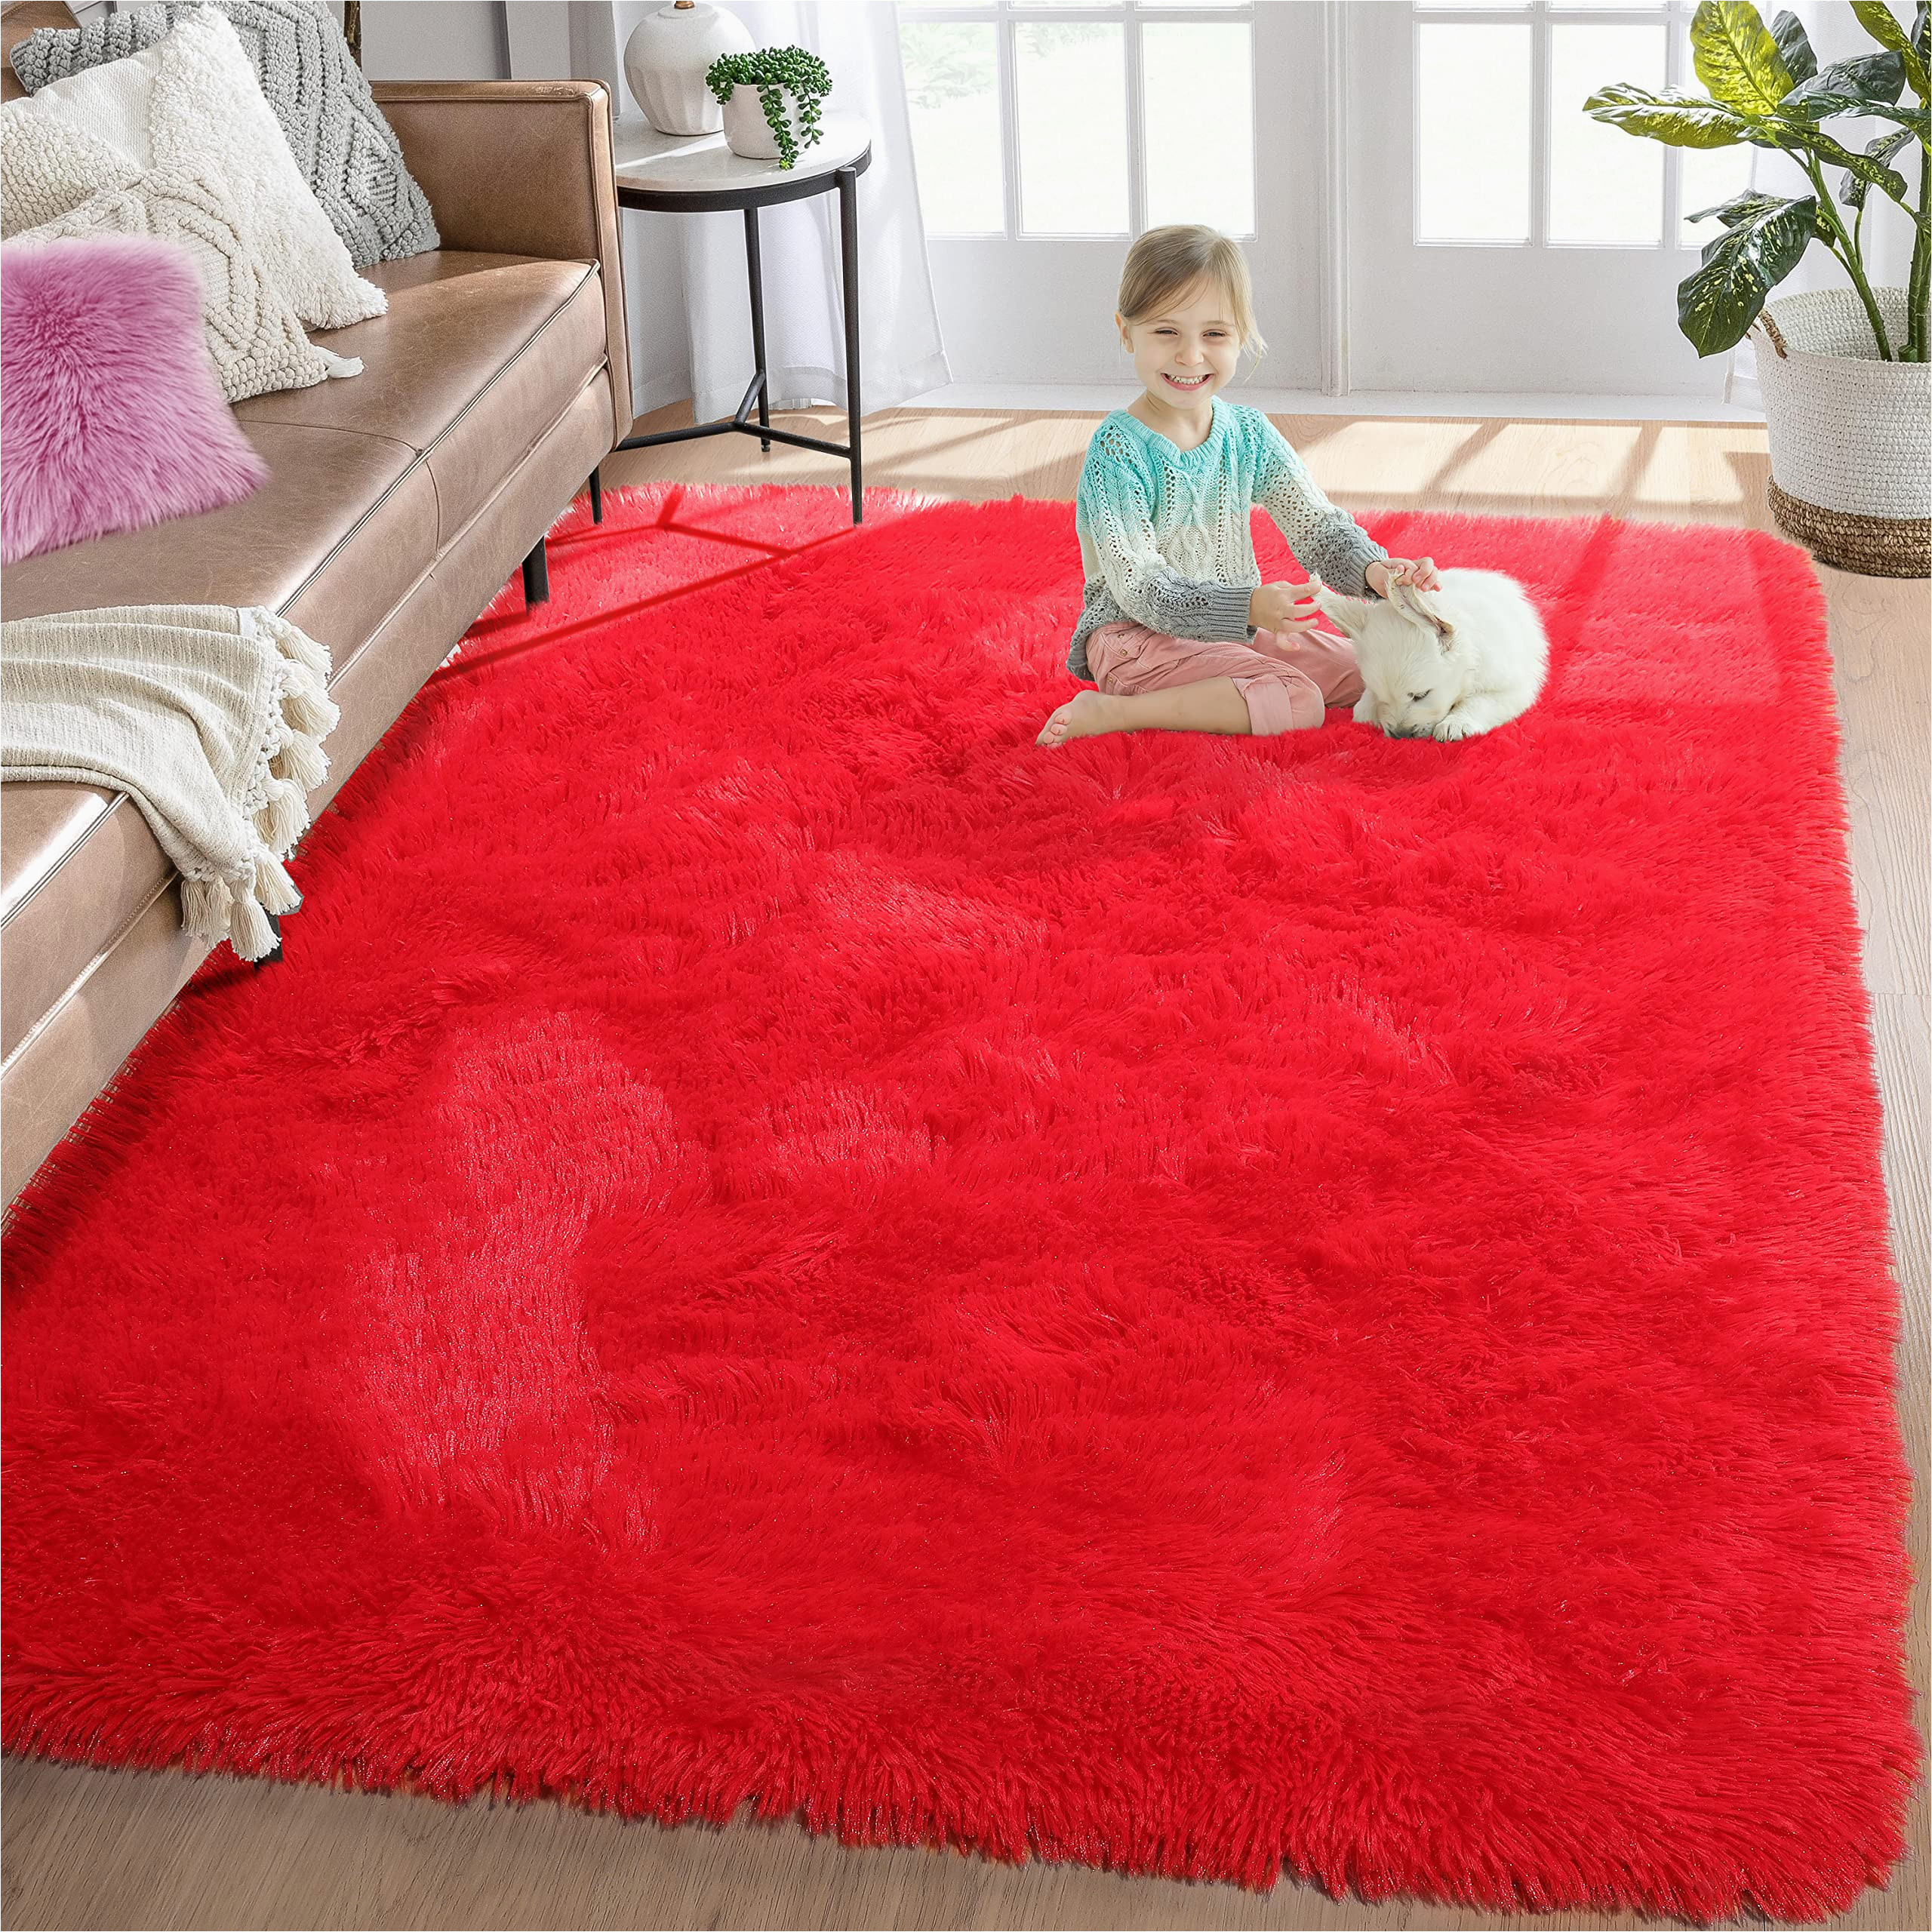 4 X 6 Red area Rug Red soft area Rug for Bedroom,4 Feet X 6 Feet,fluffy Rugs,shag Carpet for Living Room,fuzzy Rug for Kids Baby Room,furry Rug for Girls Boys Room,large …